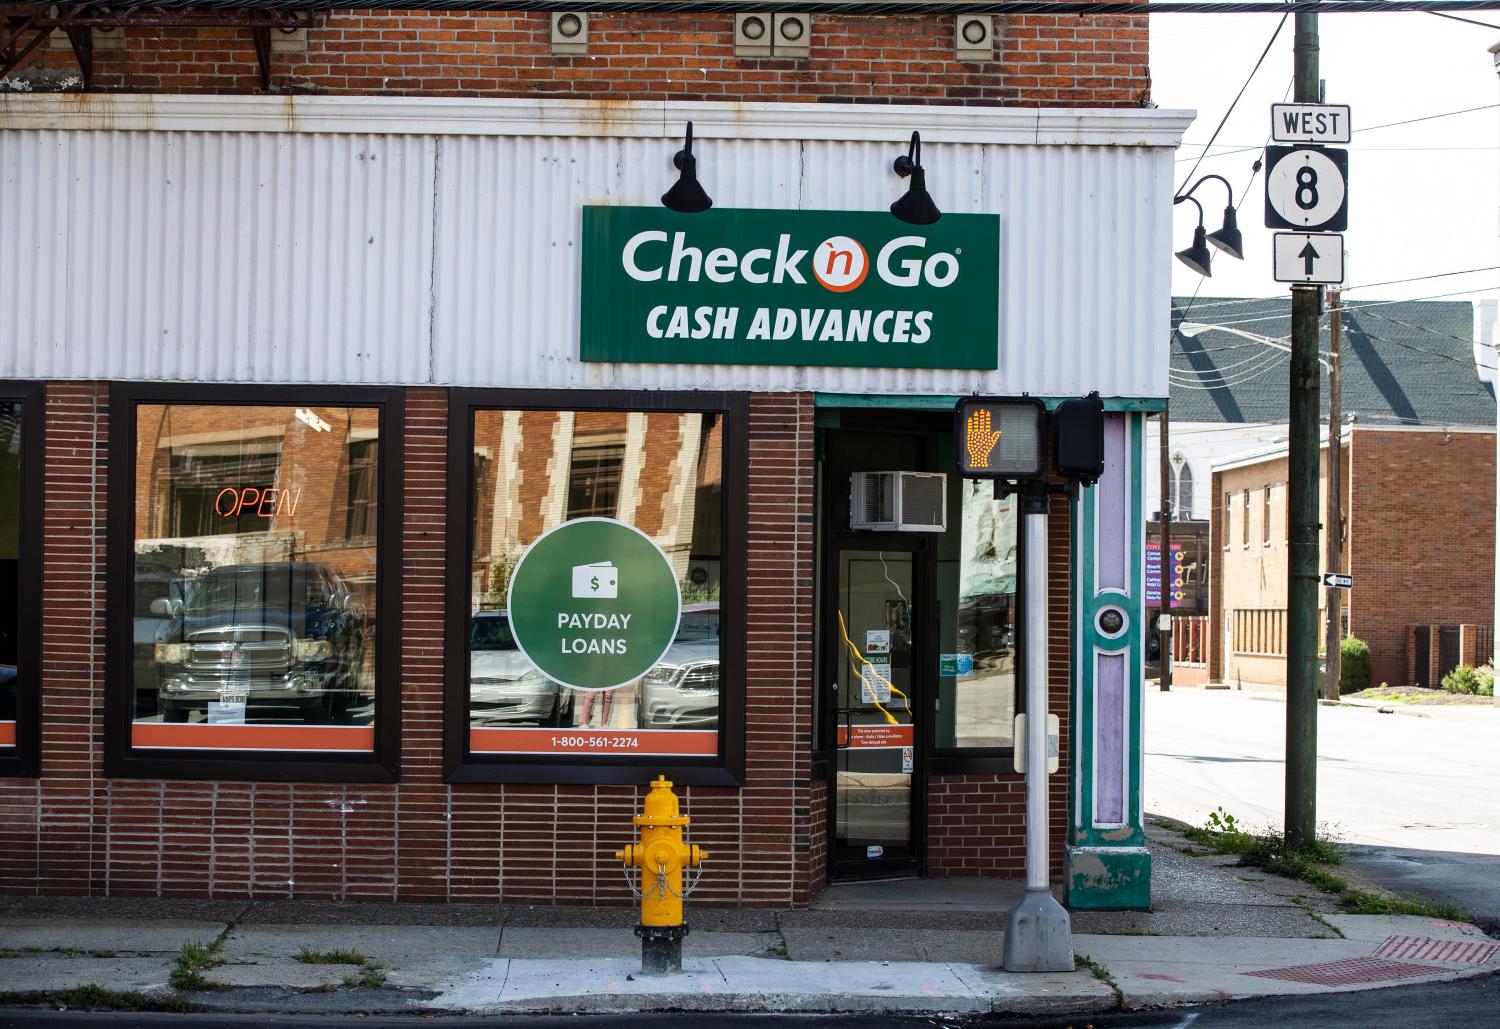 Check 'n Go Cash Advances and Payday Loans on Scott Street in Covington. Photo shot Wednesday, August 28, 2019.Road Paydayloan1